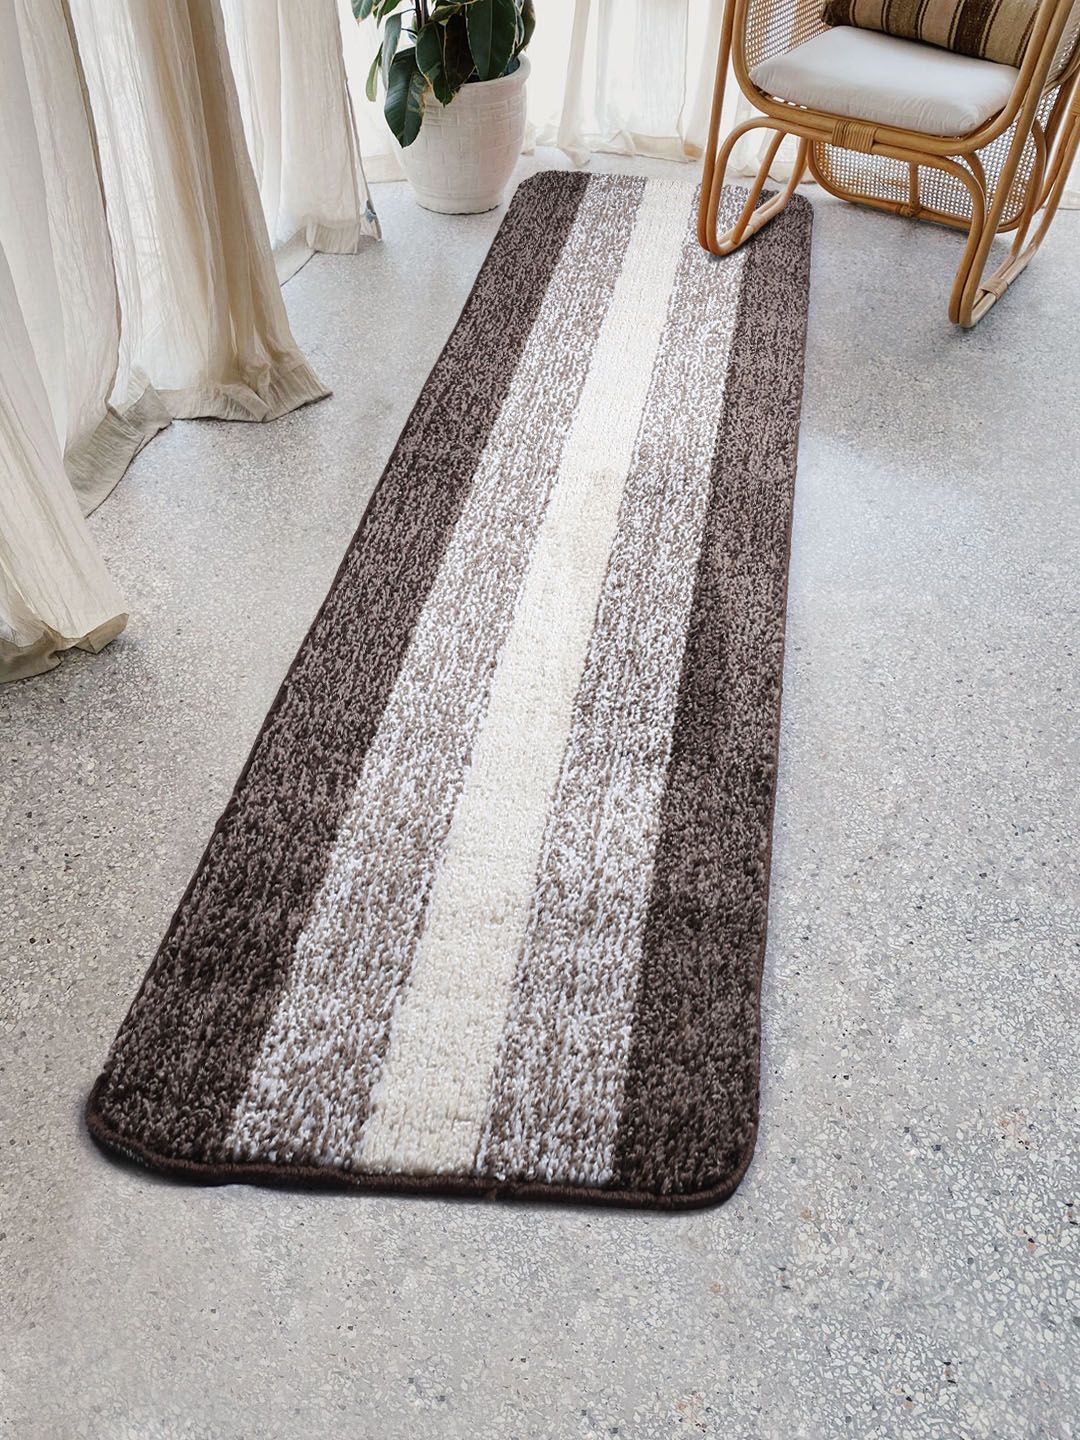 Saral Home Brown & Beige Striped Microfibre Runner Price in India